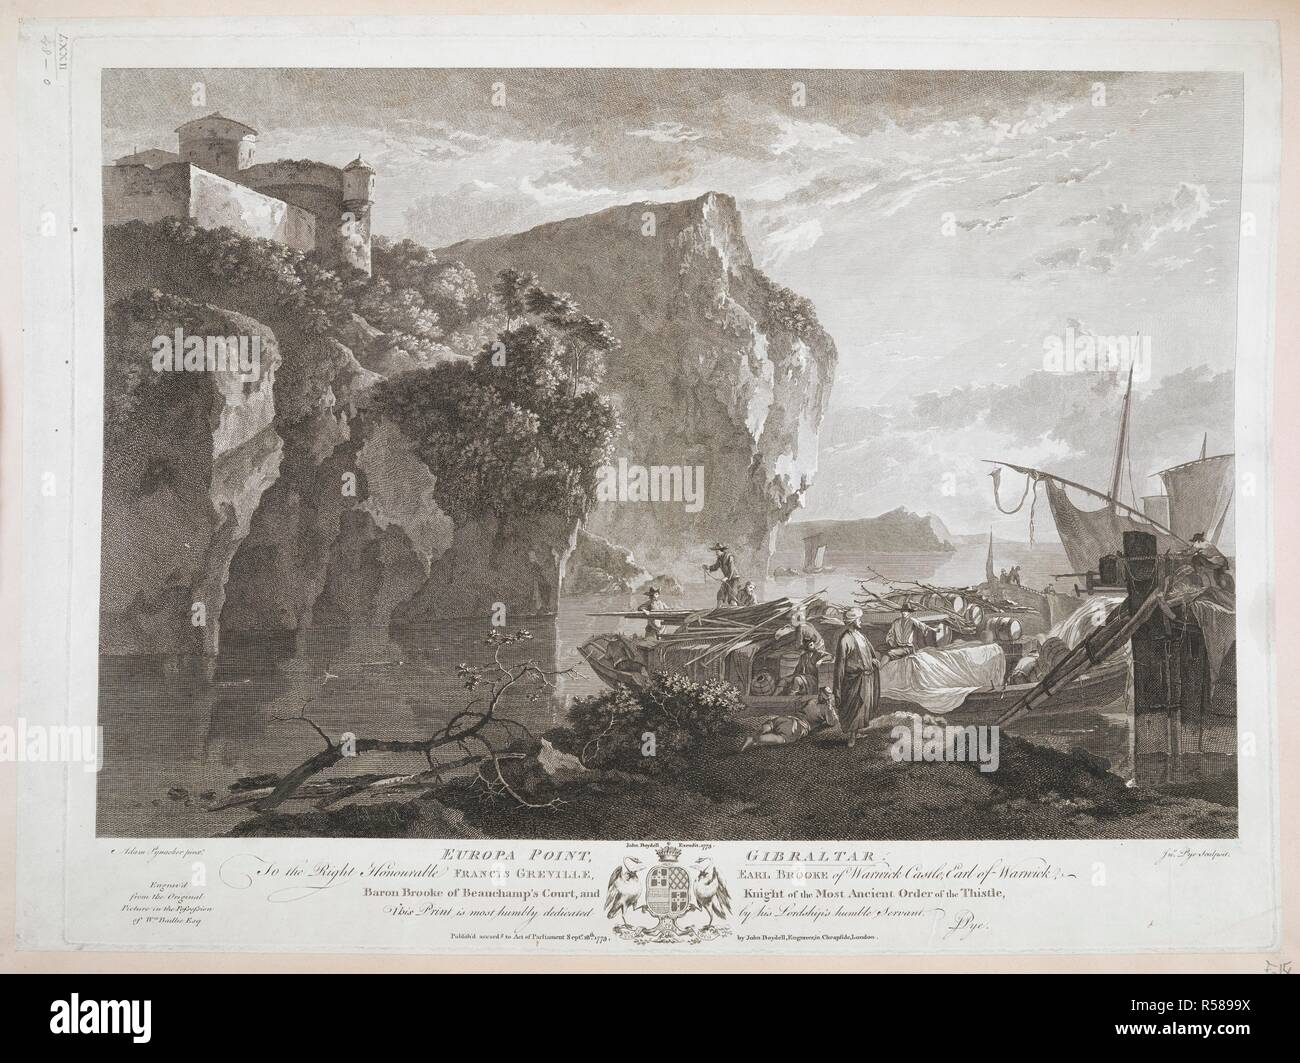 A view of the Rock of Gibraltar with barges and merchants in Oriental costume in the foreground. Europa Point, Gibraltar : To the Right Honourable FRANCIS GREVILLE, EARL BROOKE of Warwick Castle, Earl of Warwick, Baron Brooke of Beauchamp's Court, and Knight of the Most Ancient Order of the Thistle, This Print is most humbly dedicated by his Lordship's humble Servant. Pye. [London] : Publish'd accord.g to Act of Parliament Sept.r 18.th 1773, by John Boydell, Engraver, in Cheapside, London, [September 18 1773]. Source: Maps K.Top.72.48.o. Language: English. Stock Photo